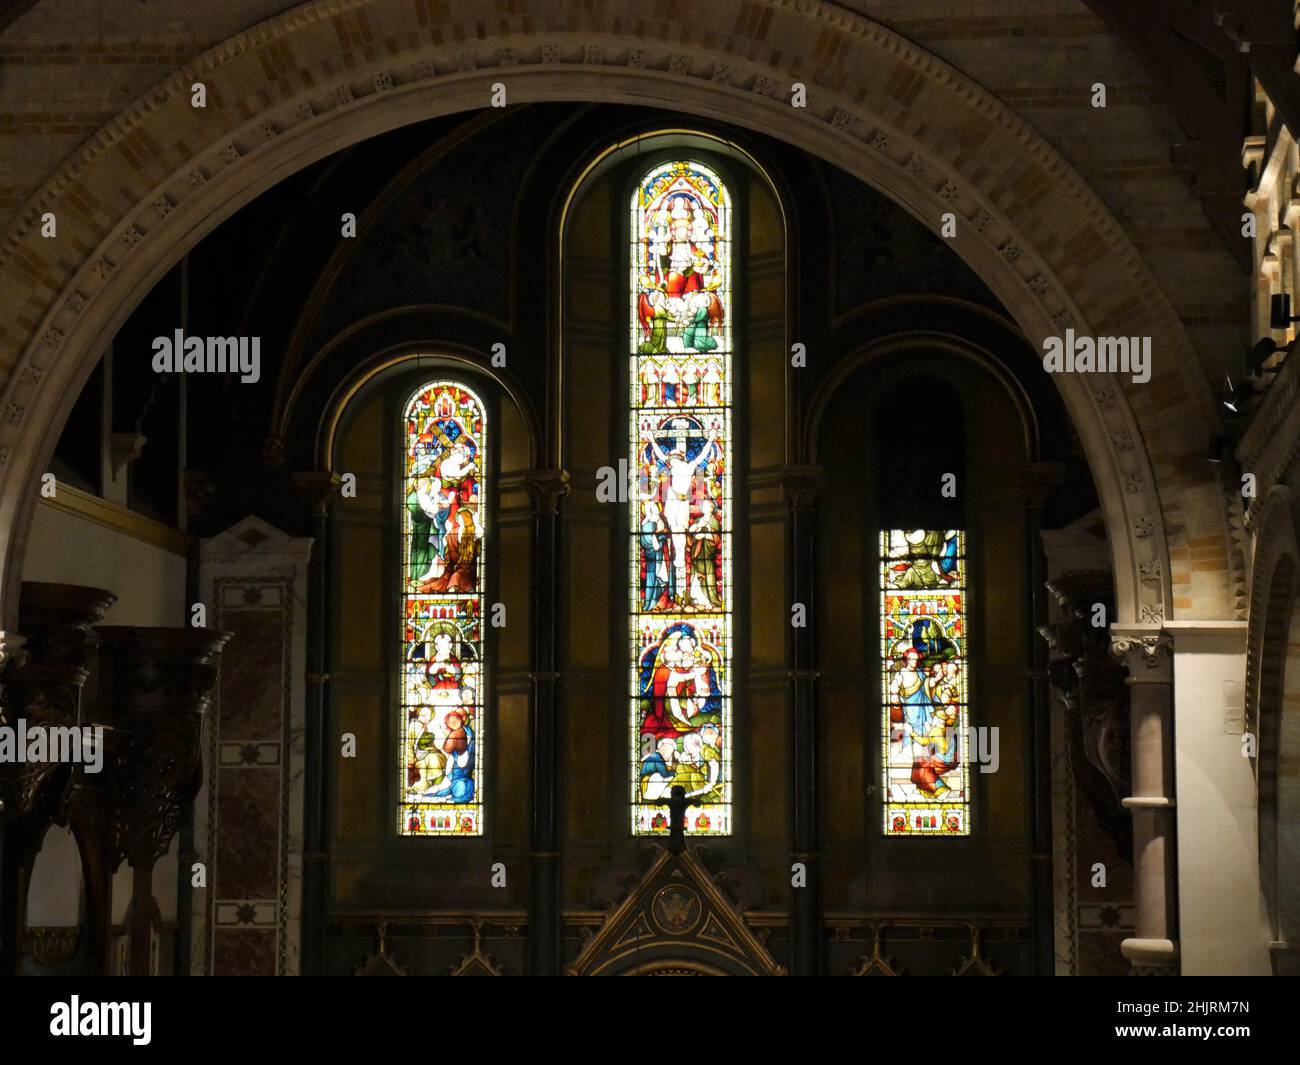 Stained glass windows in St Marks Church N Audley Street, London Stock Photo